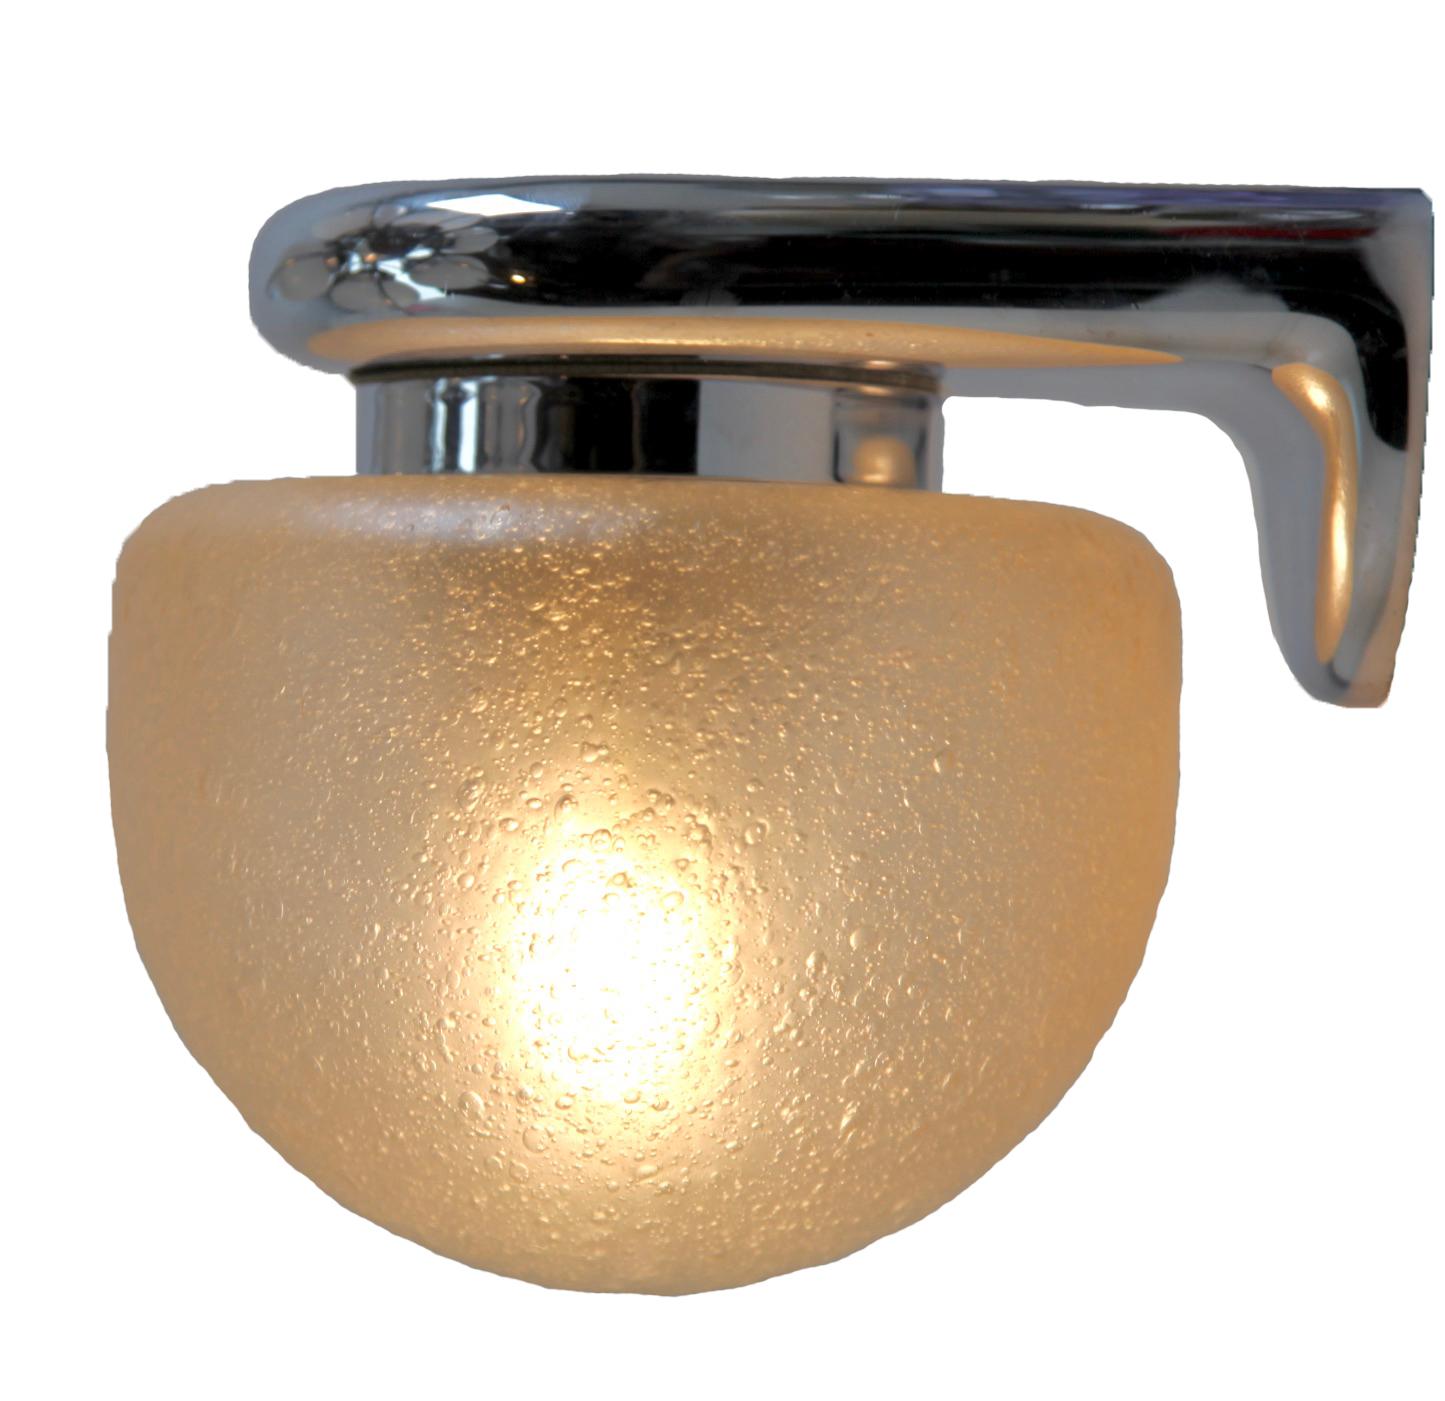 Franken Kg Kalmar Art Glass sconce 'wall-light', circa 1970s
Attractive light fixture made up of Murano Glass 
Solid chrome mounts with one E27 screw fitting. 

I have equipped the lamp with a screw terminal-block, so that it will be easily